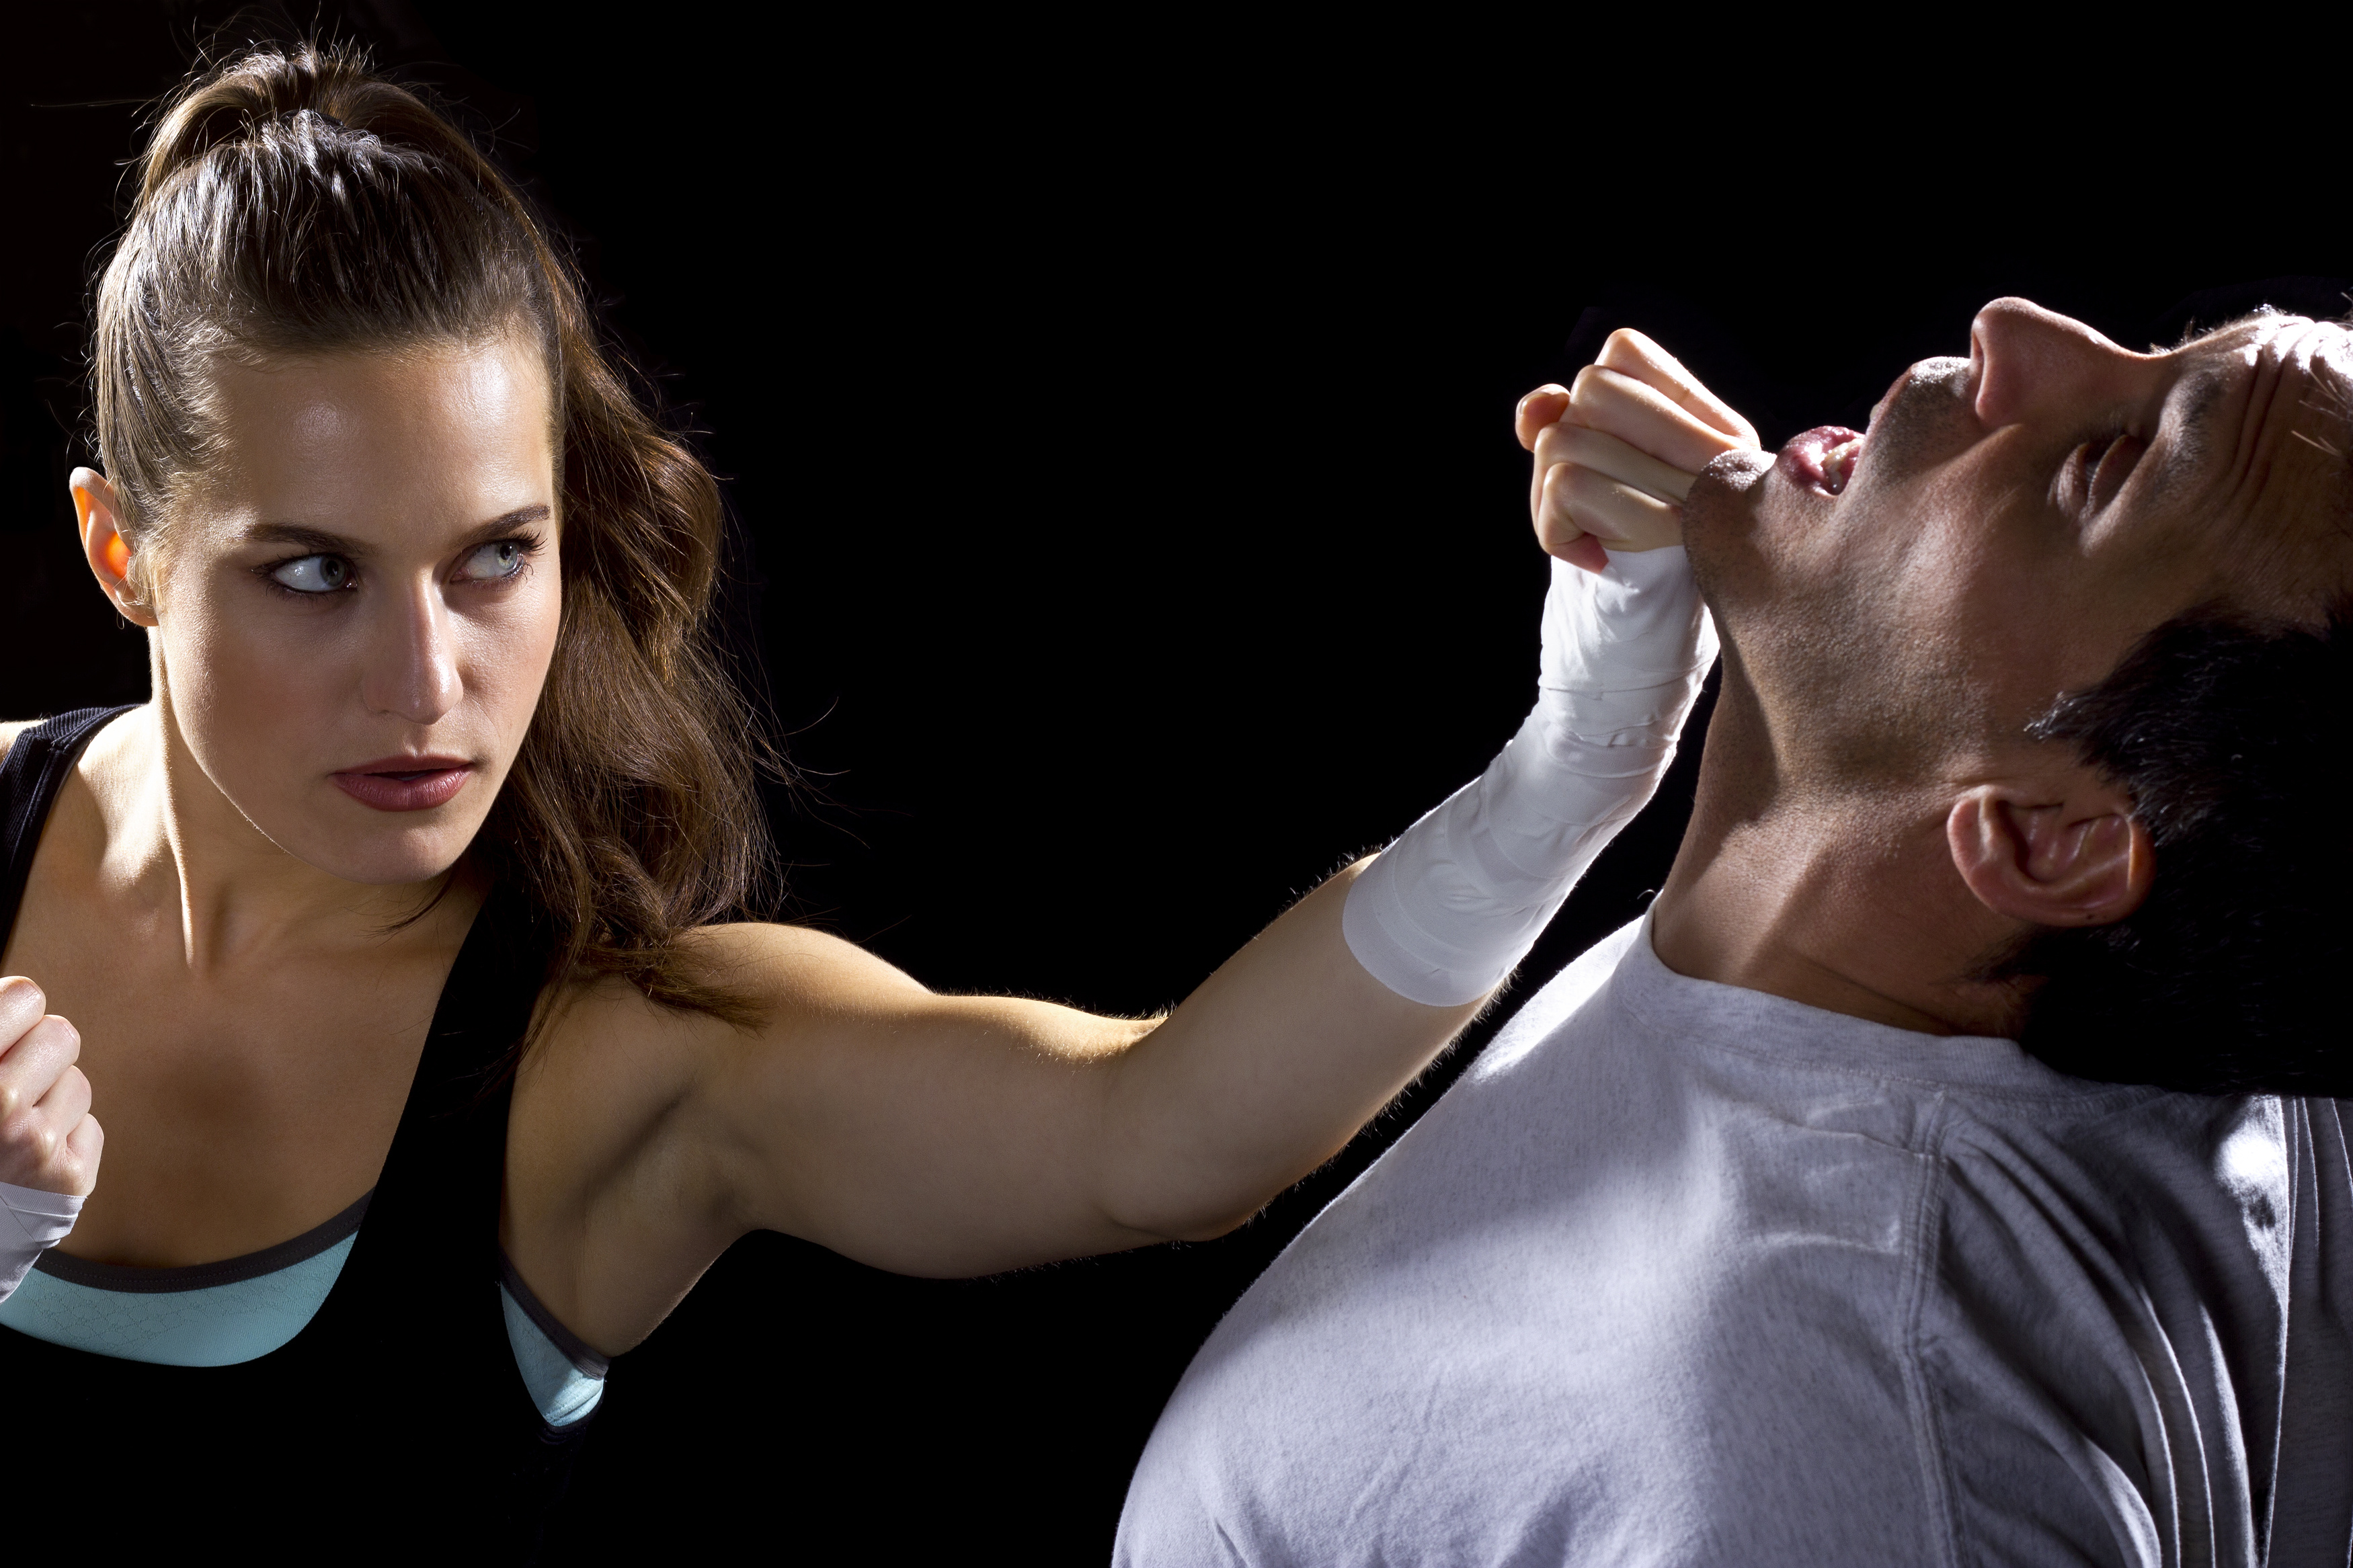 The Importance of Women Learning Self-Defense